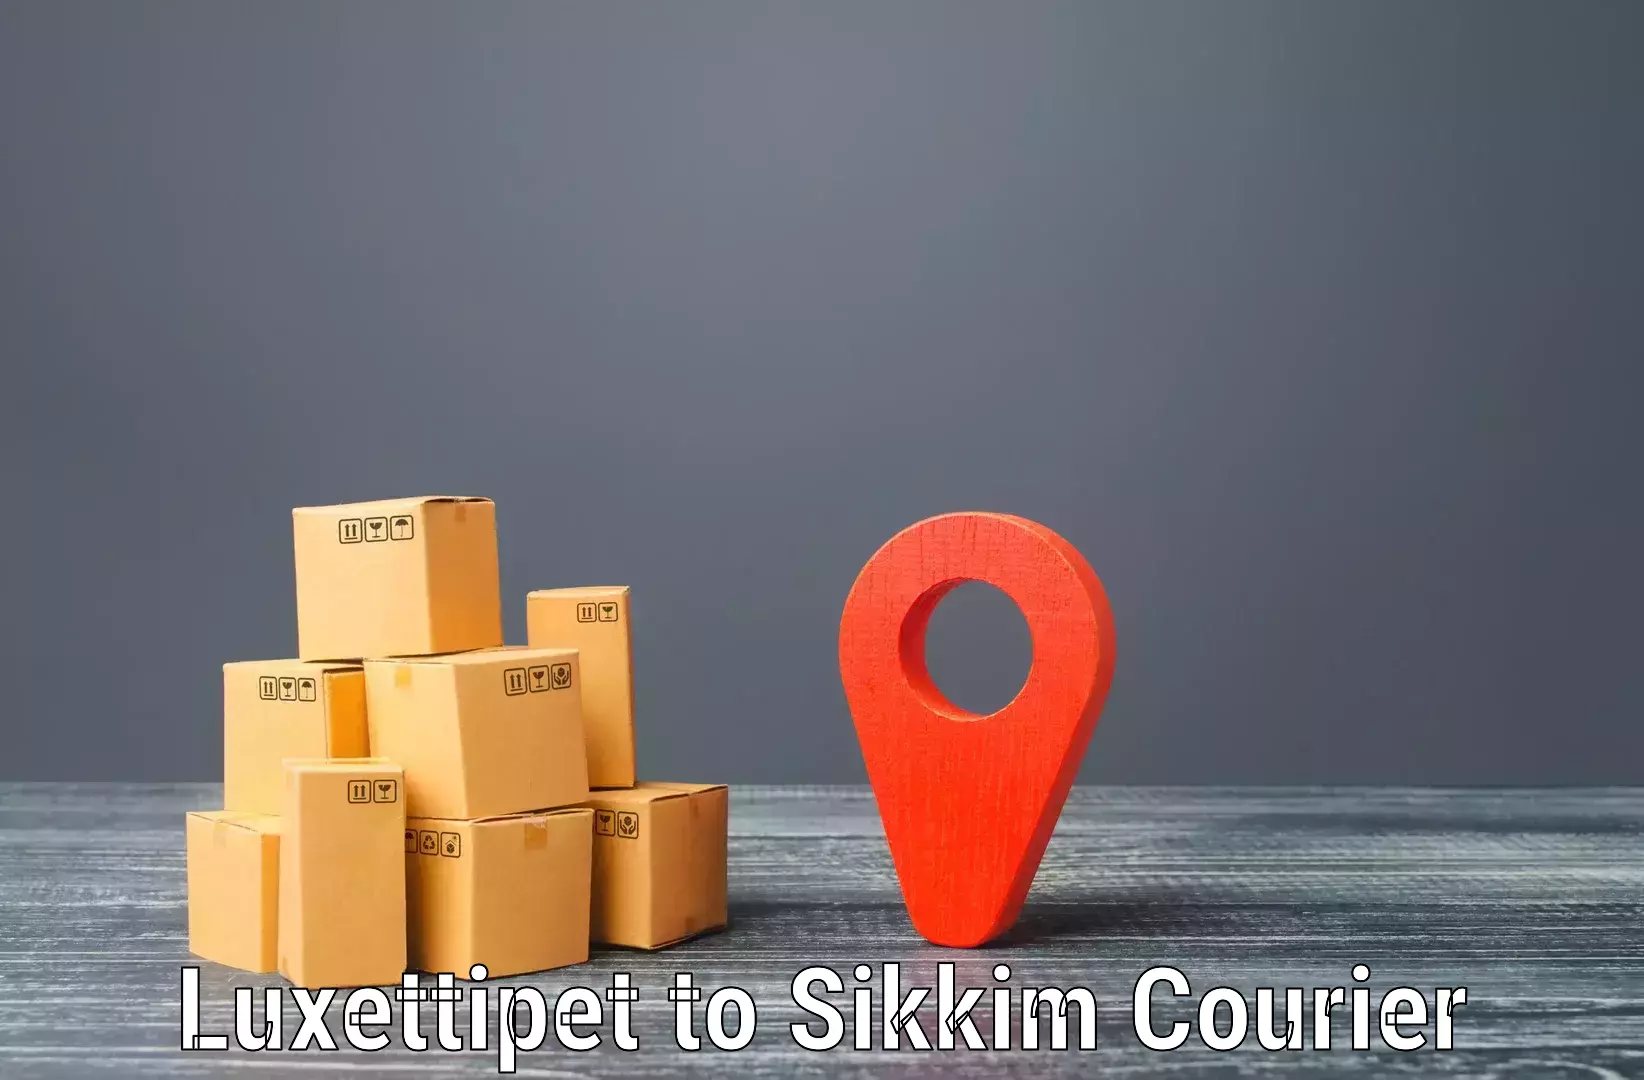 Logistics management Luxettipet to South Sikkim